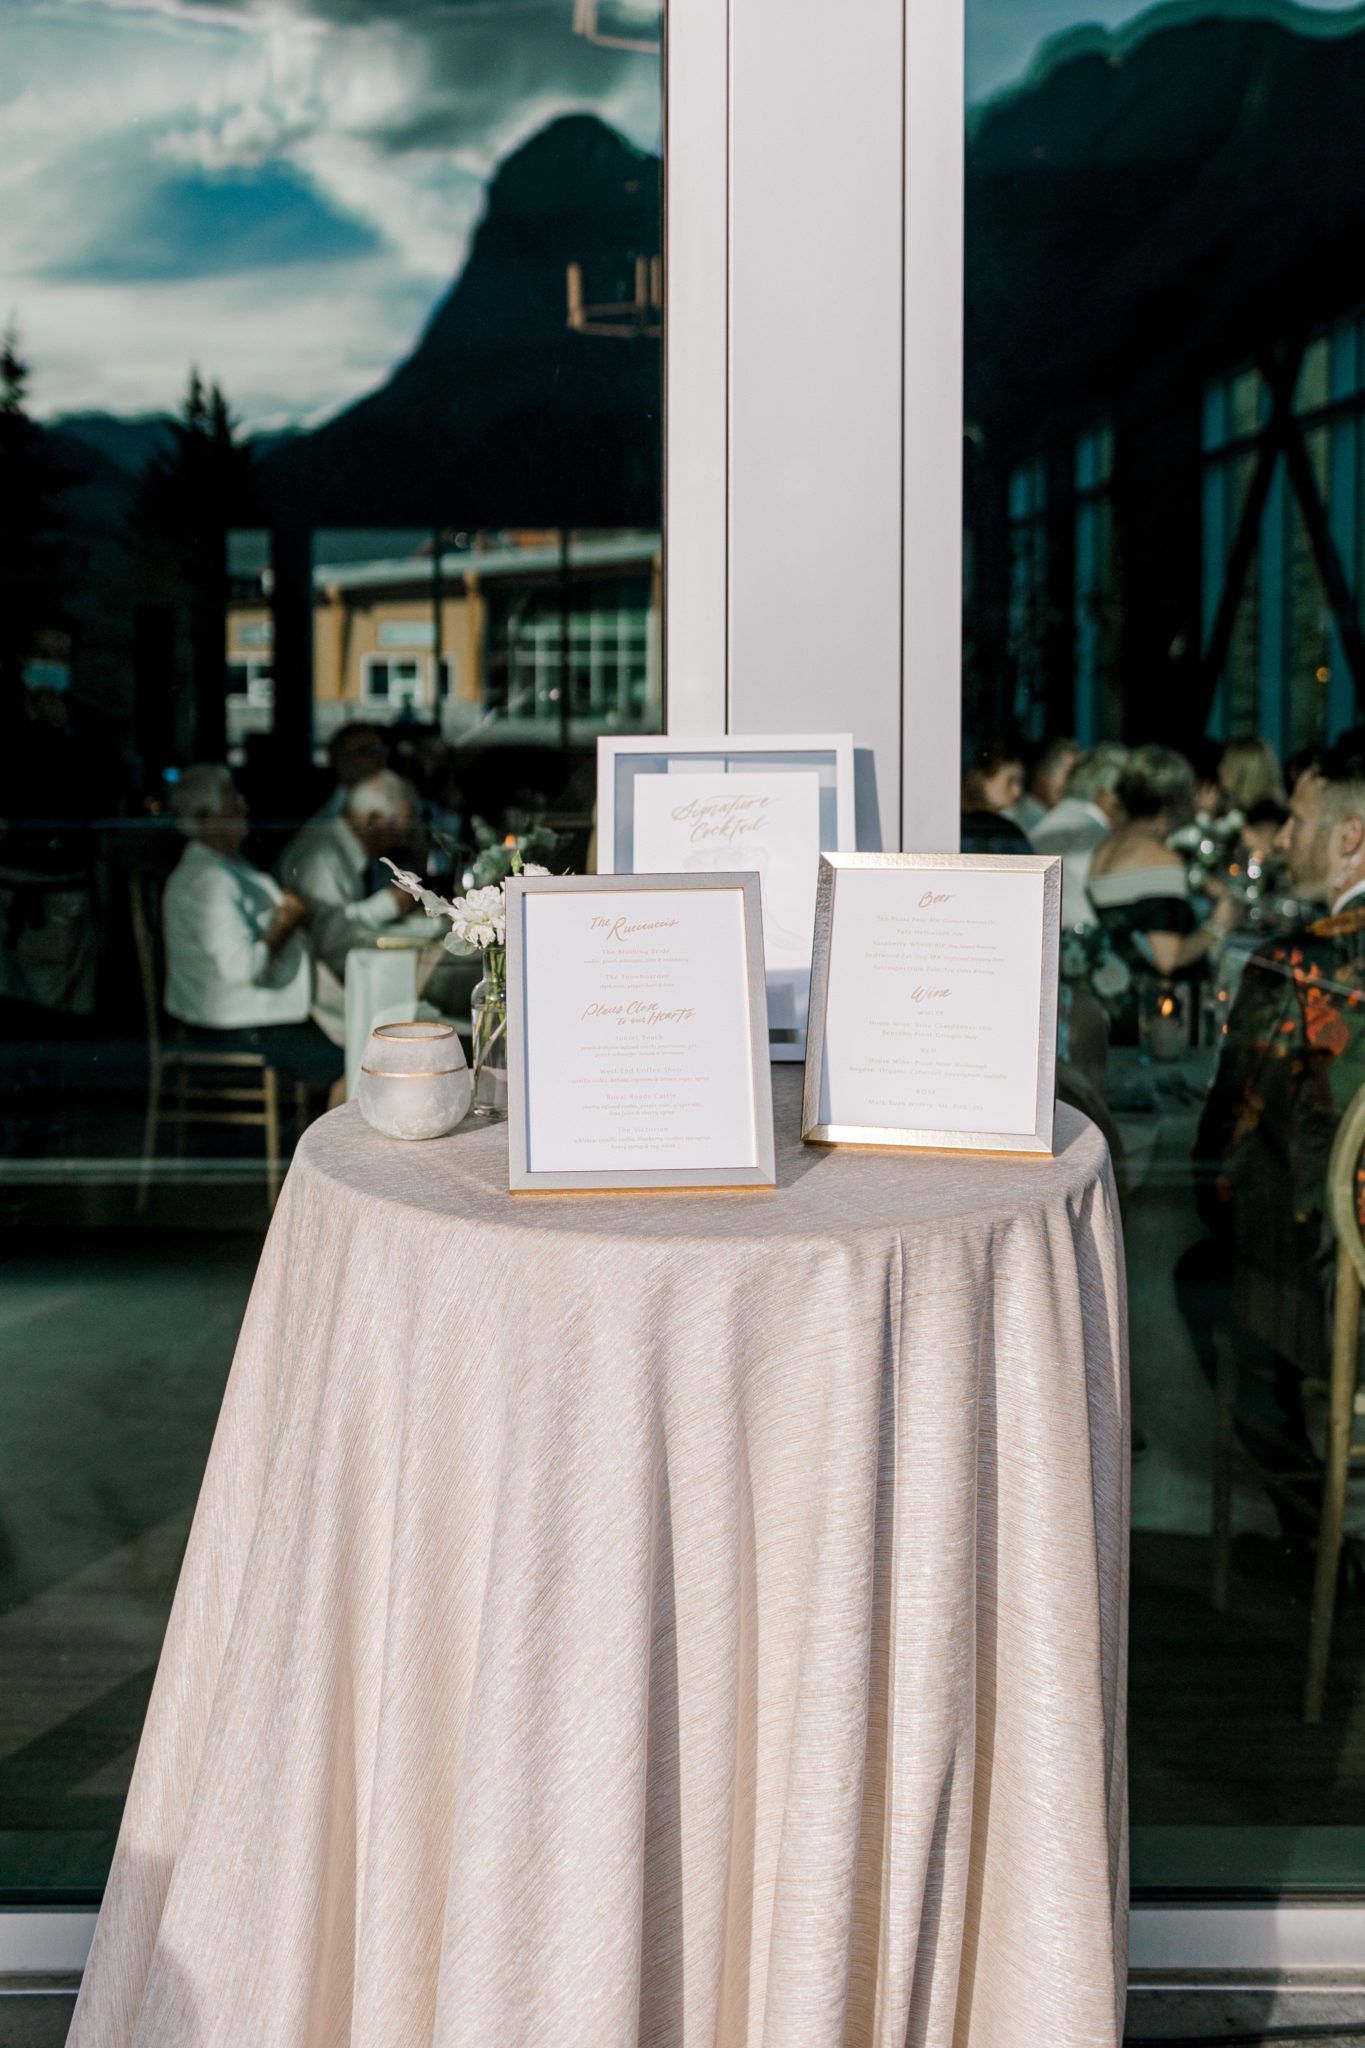 Blush and green welcome sign at outdoor wedding reception